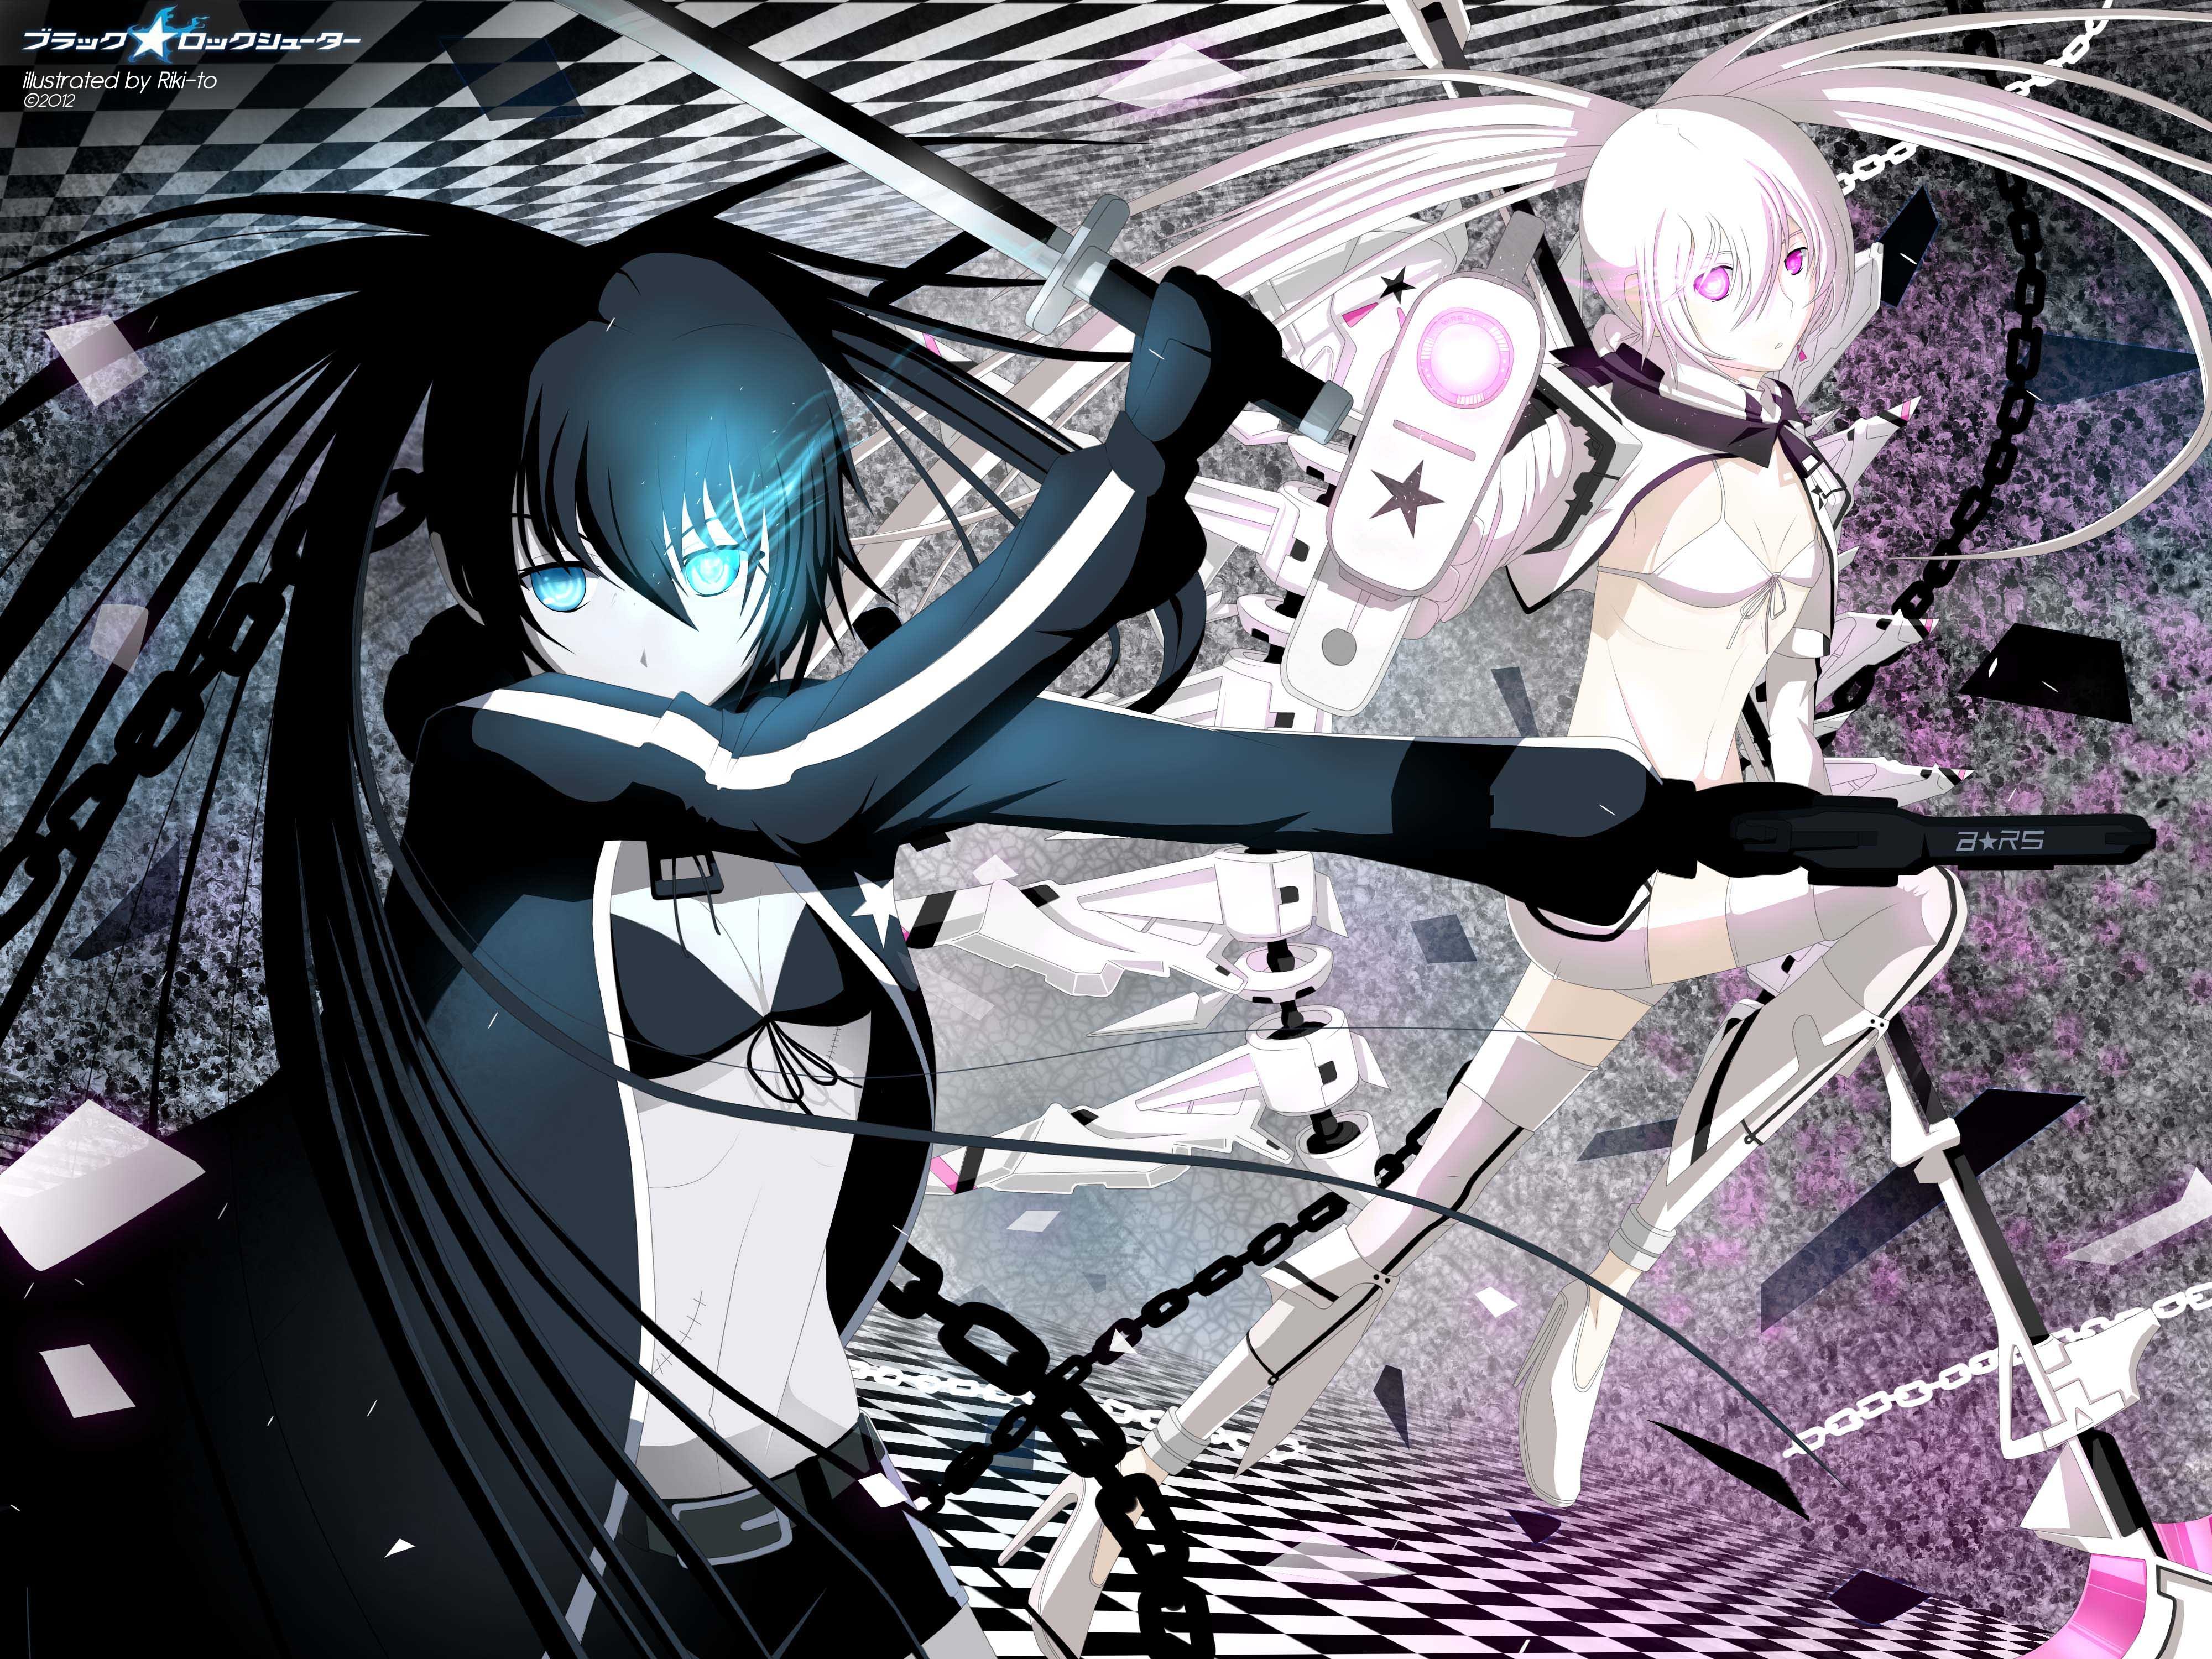 Anime 4000x3000 Black Rock Shooter anime girls anime White Rock Shooter Strength (Black Rock Shooter) women with swords blue eyes chains pink eyes long hair 2012 (Year)